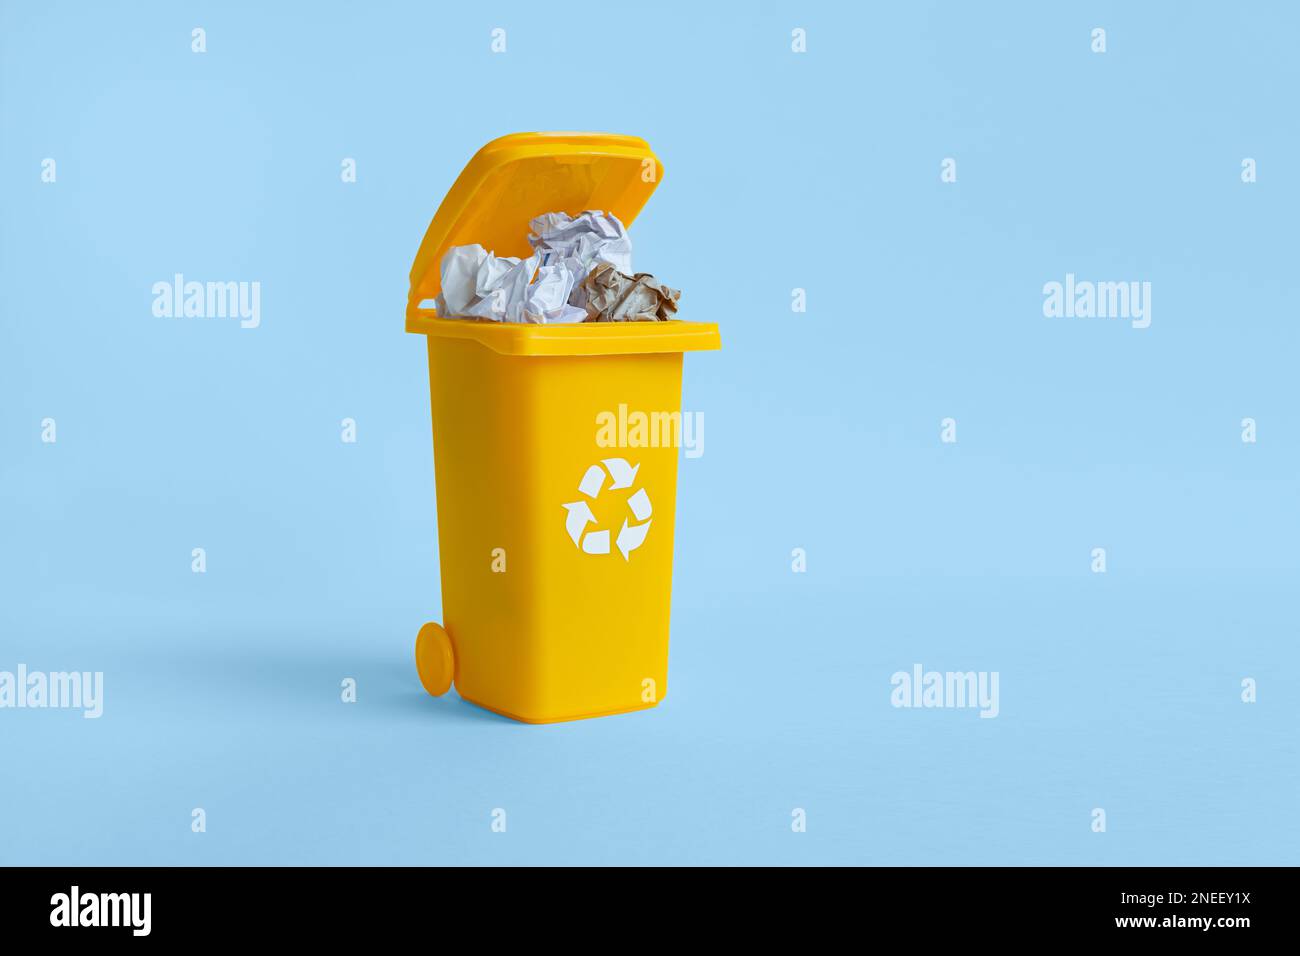 Almost closed container with paper waste isolated on the blue background with copy space, waste recycling concept Stock Photo